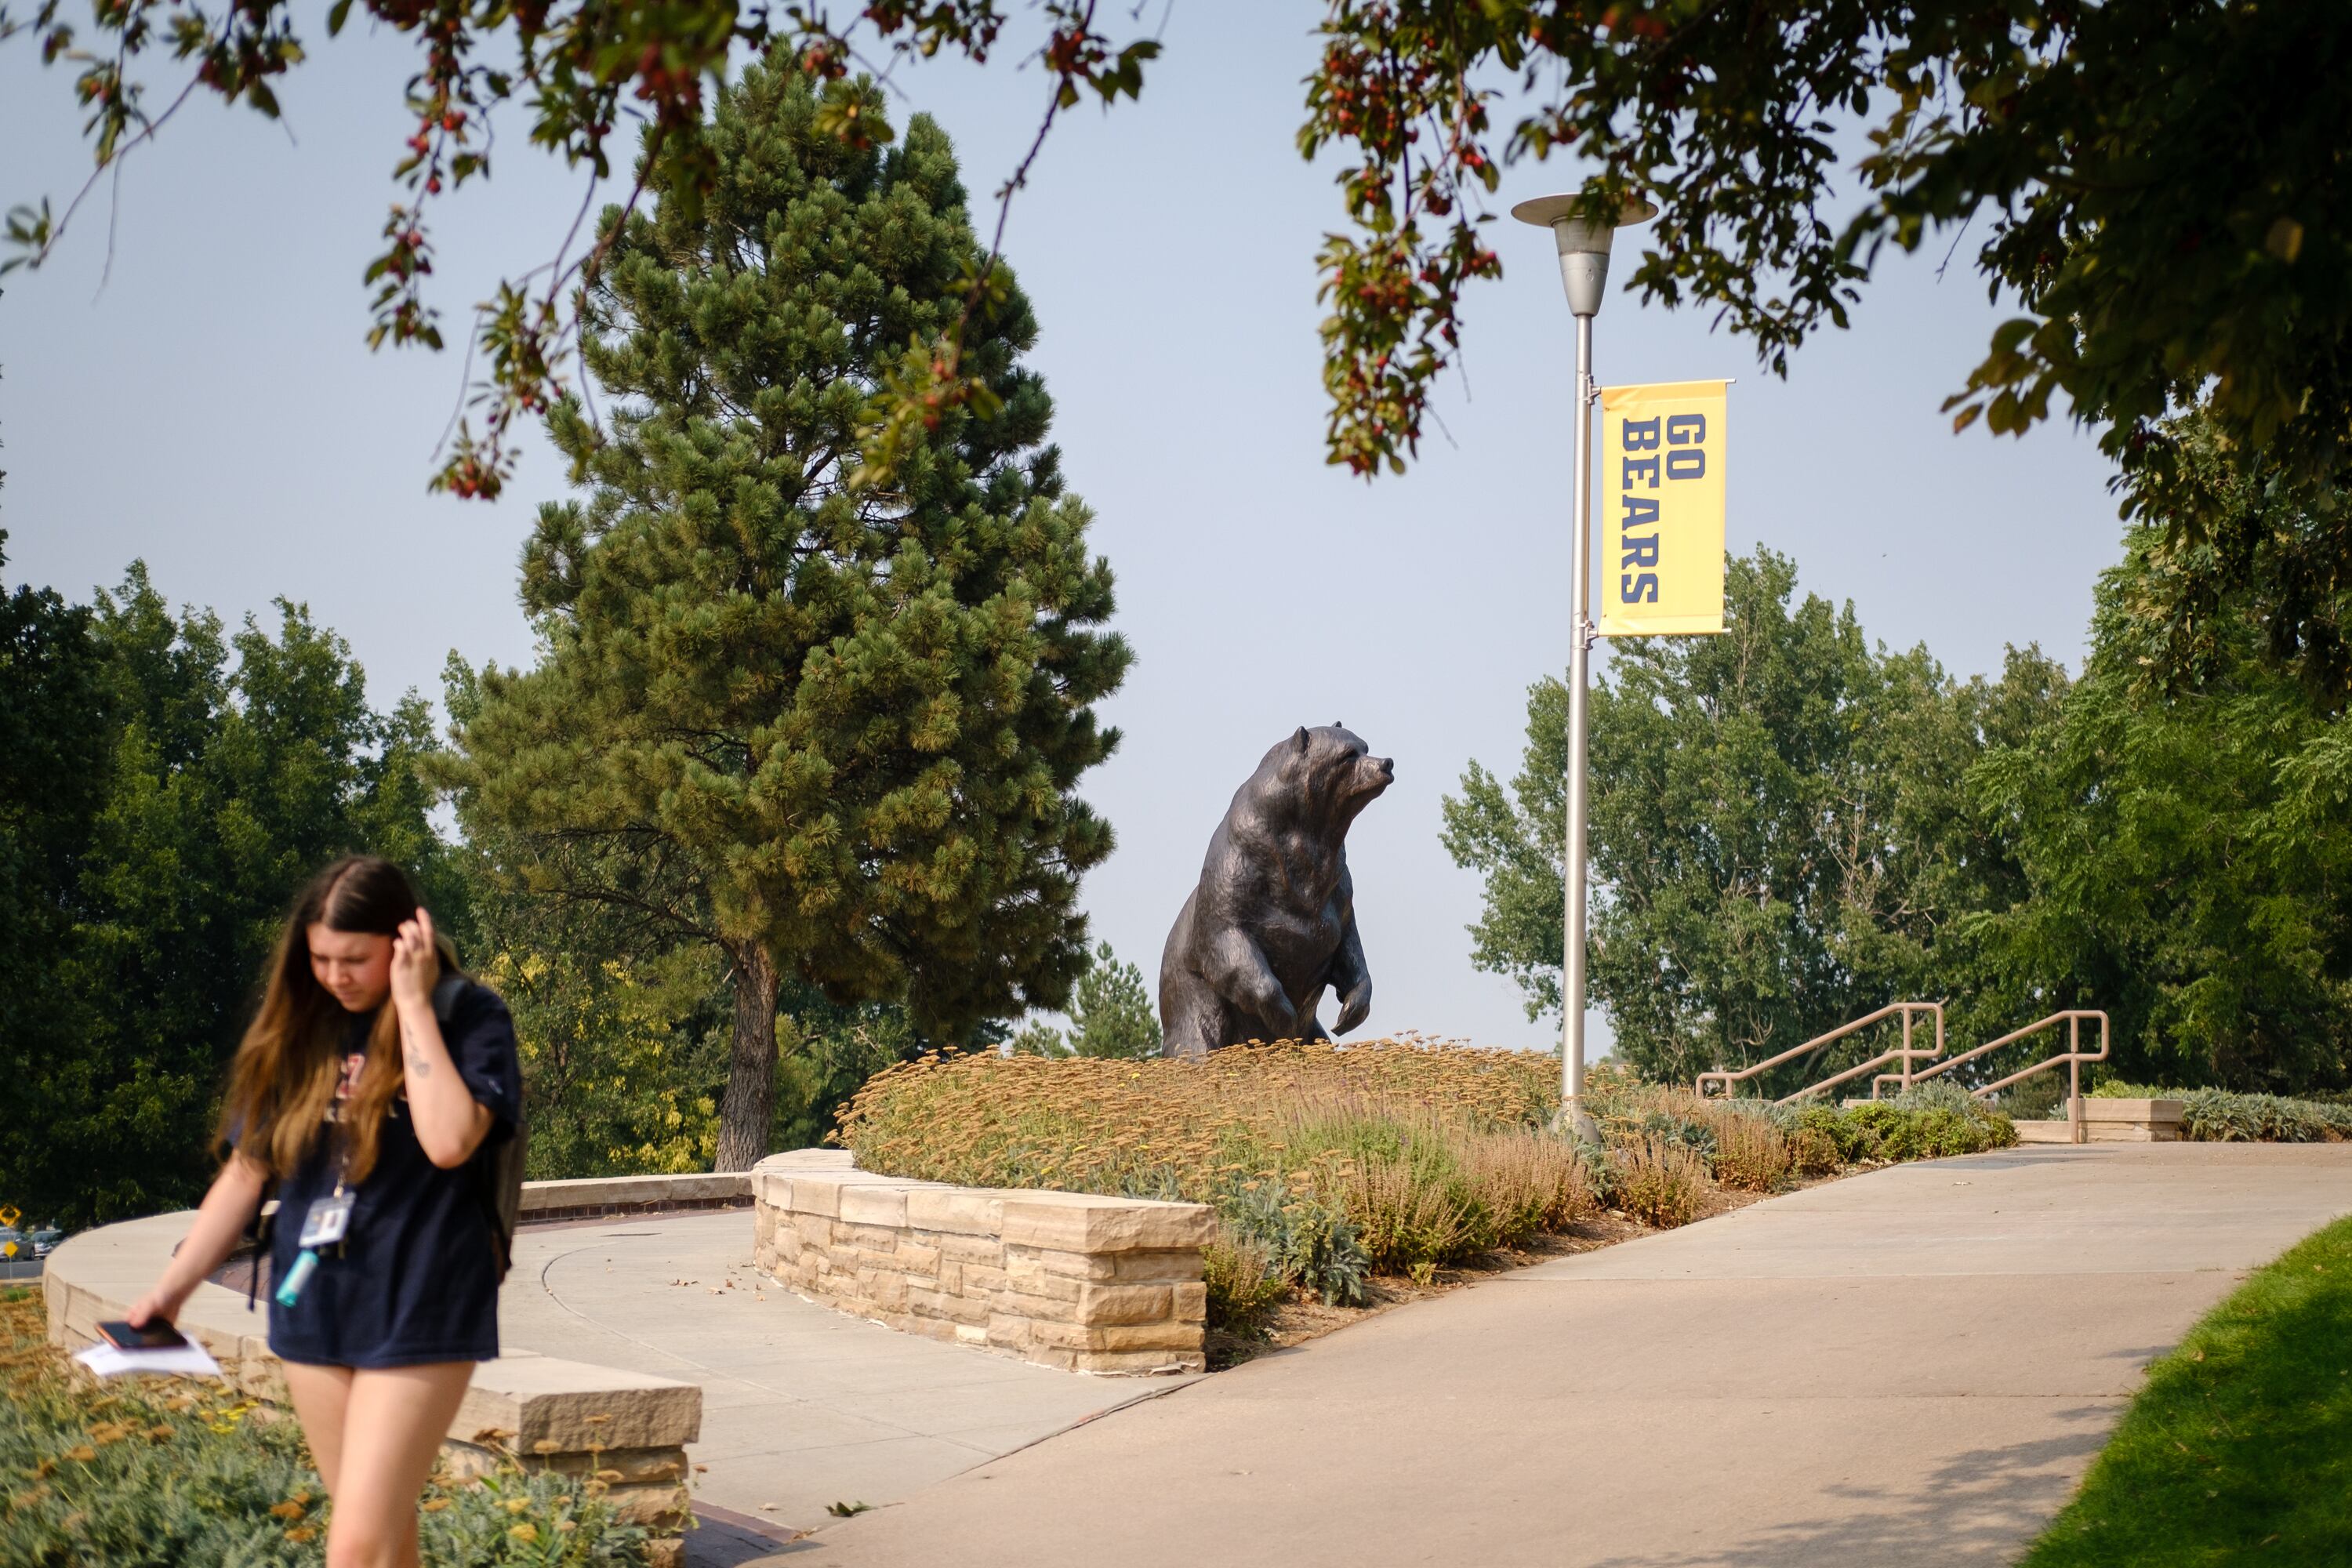 A student wearing a t-shirt and shorts walks down a sidewalk with a statue of a bear and green trees in the background.